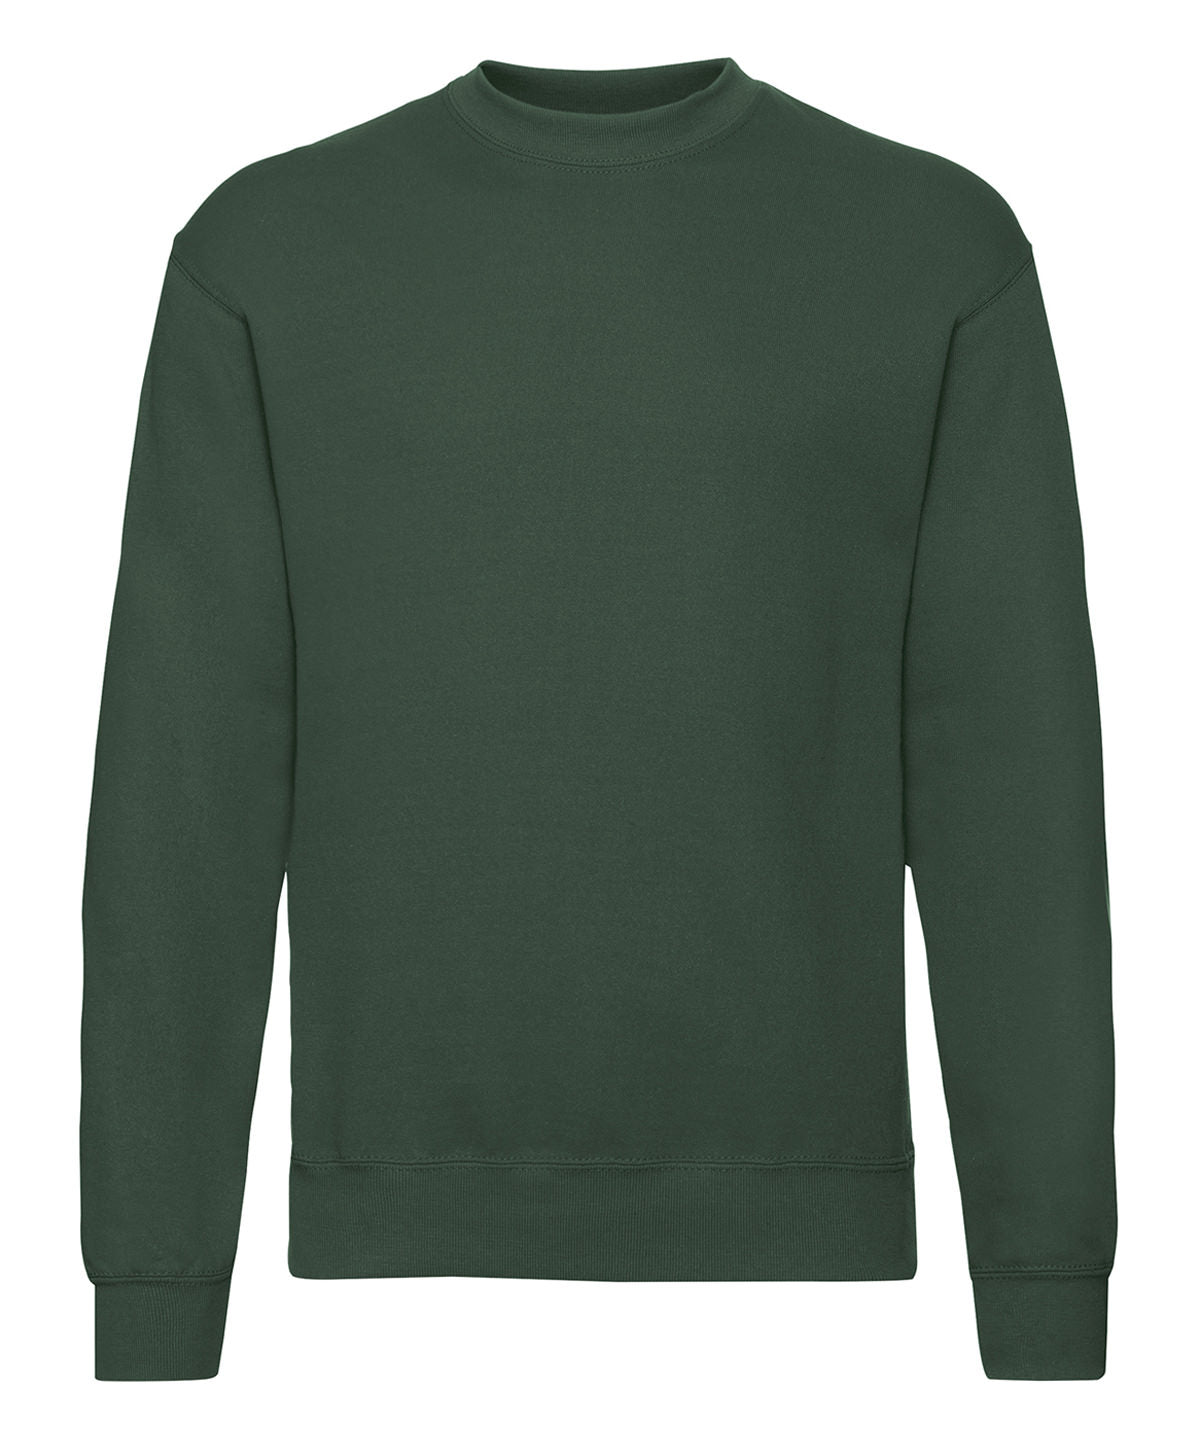 Bottle Green* - Classic 80/20 set-in sweatshirt Sweatshirts Fruit of the Loom Must Haves, New Colours for 2023, New Sizes for 2021, Plus Sizes, Price Lock, Sweatshirts Schoolwear Centres